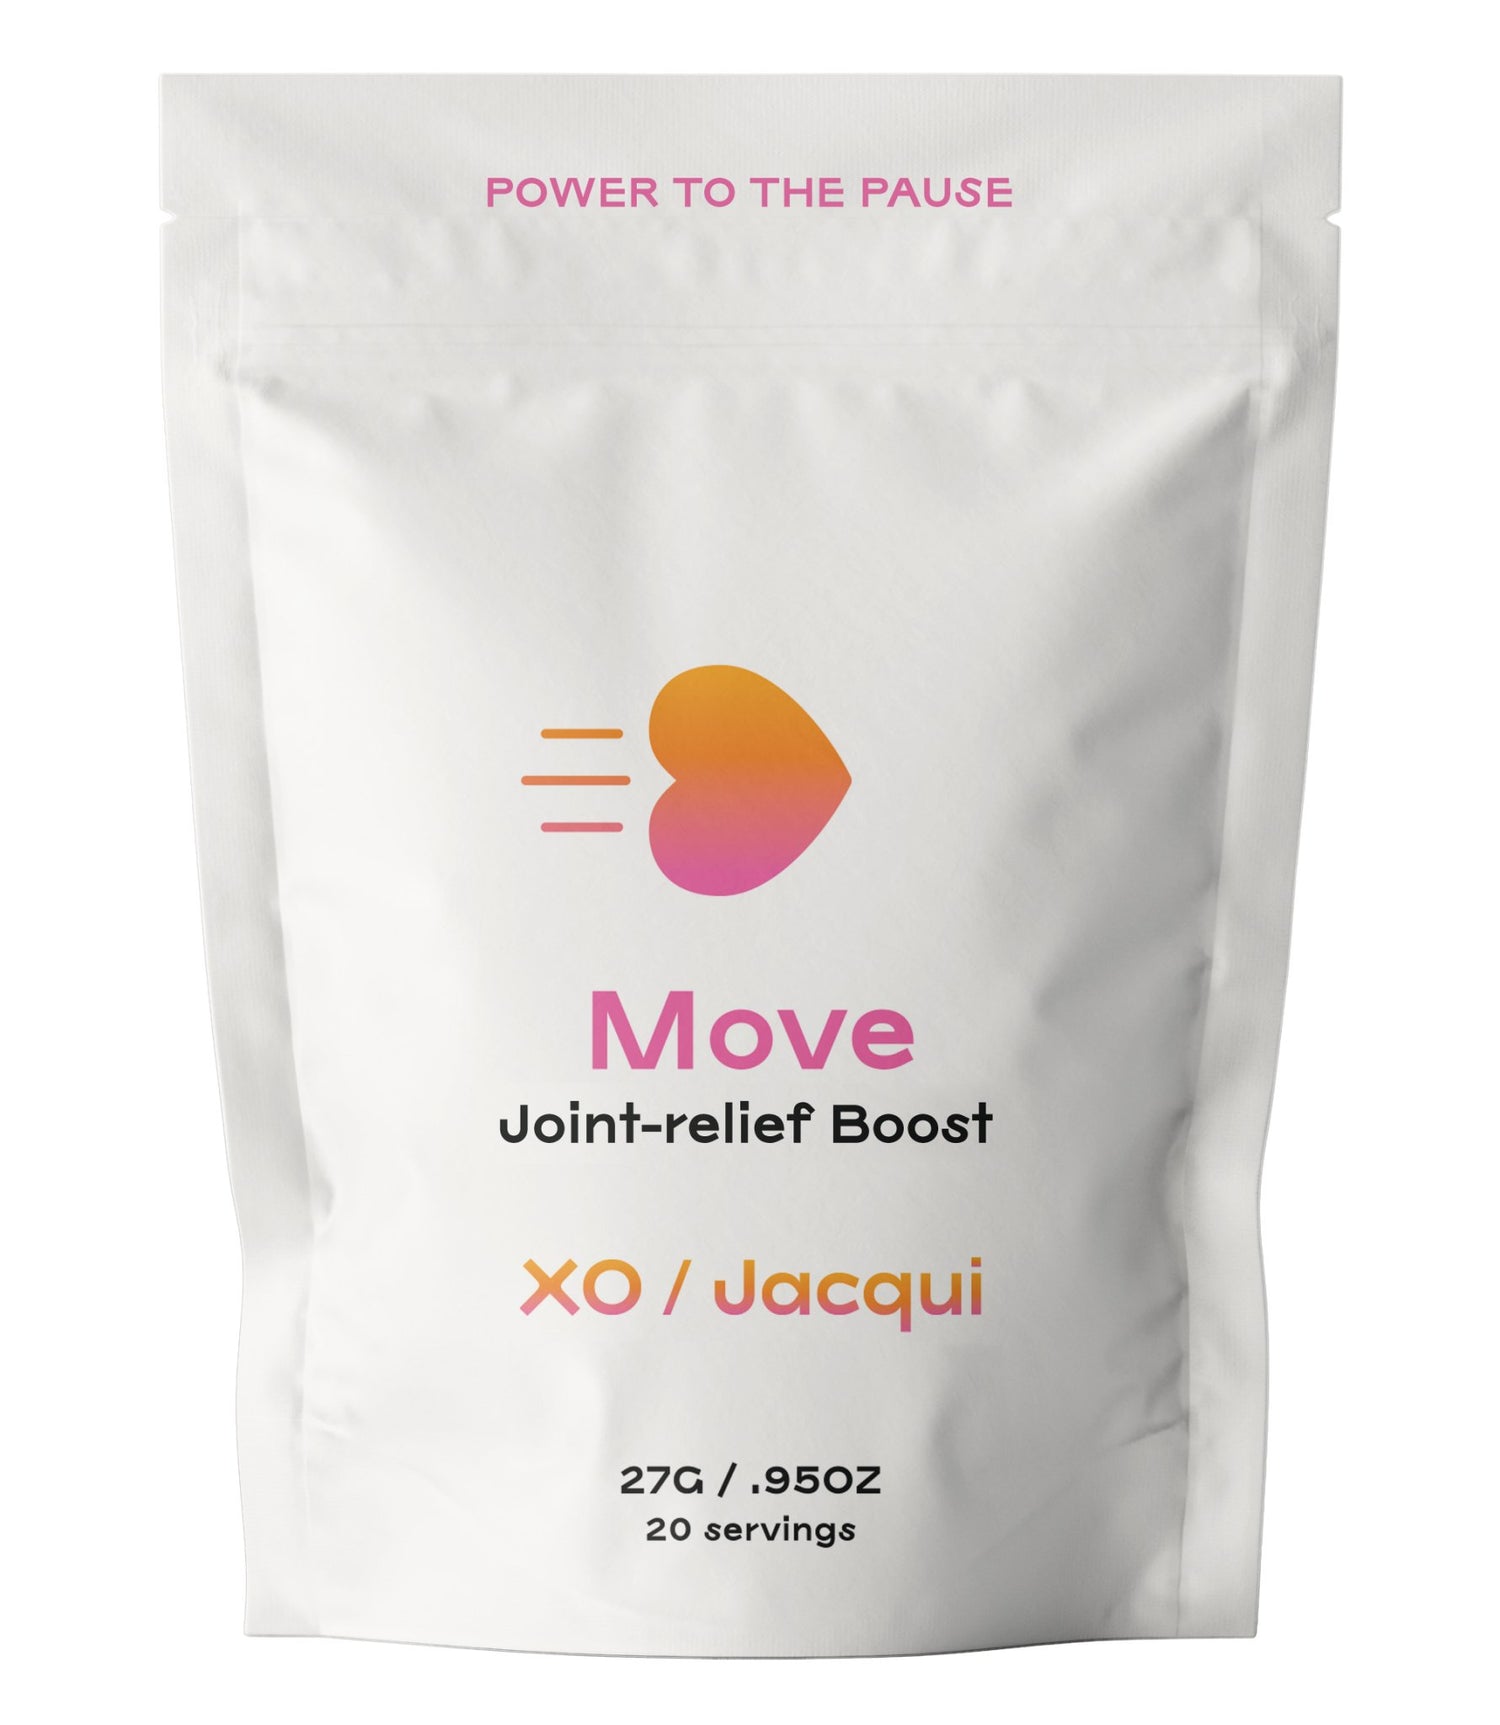 Power to the Pause | Move Joint-relief Boost | Move Boost - XO Jacqui